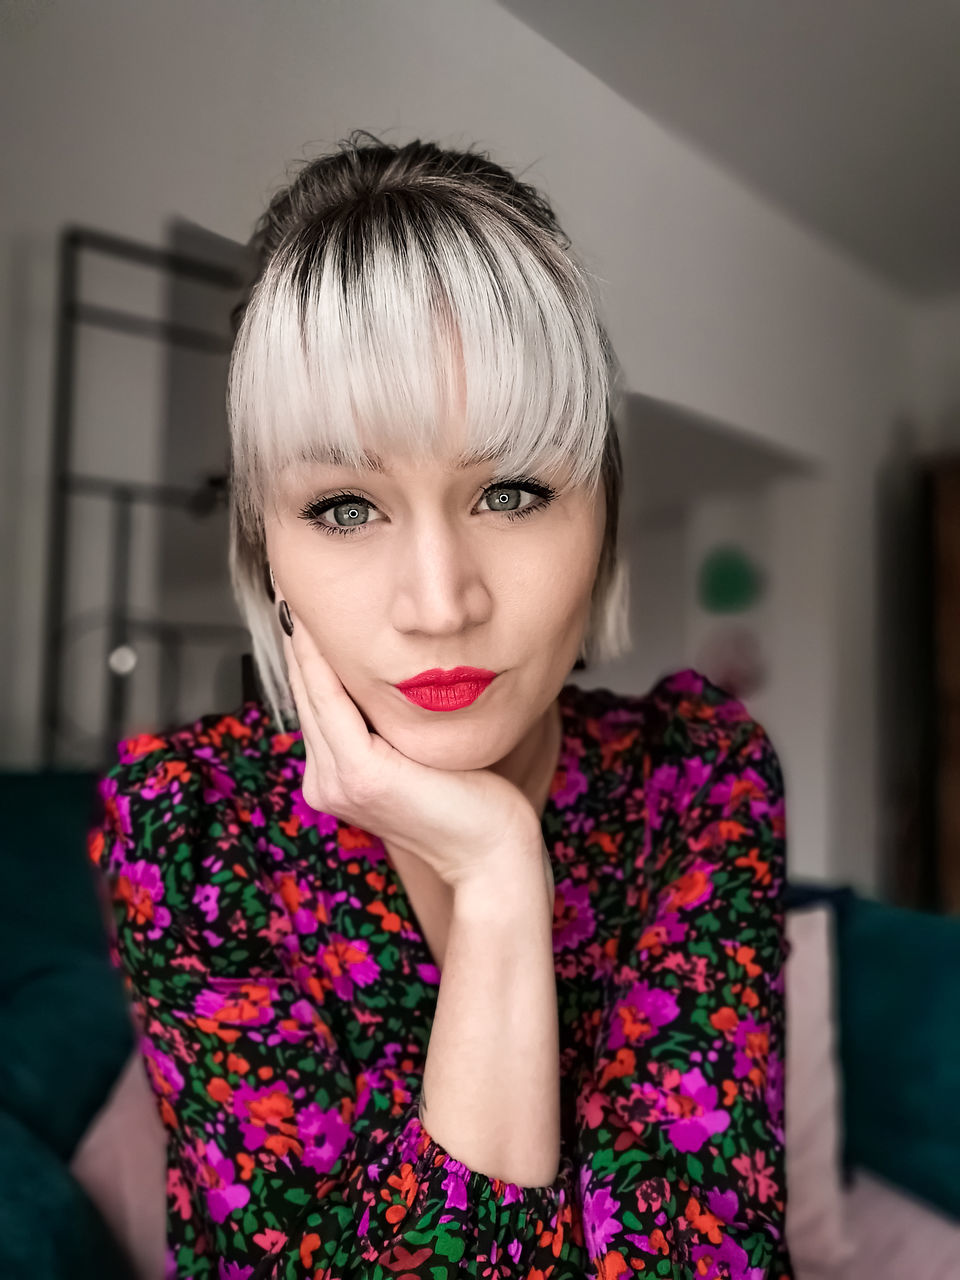 portrait, one person, adult, women, looking at camera, fashion, young adult, indoors, human hair, hairstyle, blond hair, make-up, pink, short hair, headshot, female, lipstick, waist up, front view, clothing, portrait photography, purple, lifestyles, bangs, photo shoot, dress, human face, floral pattern, emotion, cool attitude, black hair, pattern, elegance, smiling, person, human eye, eye